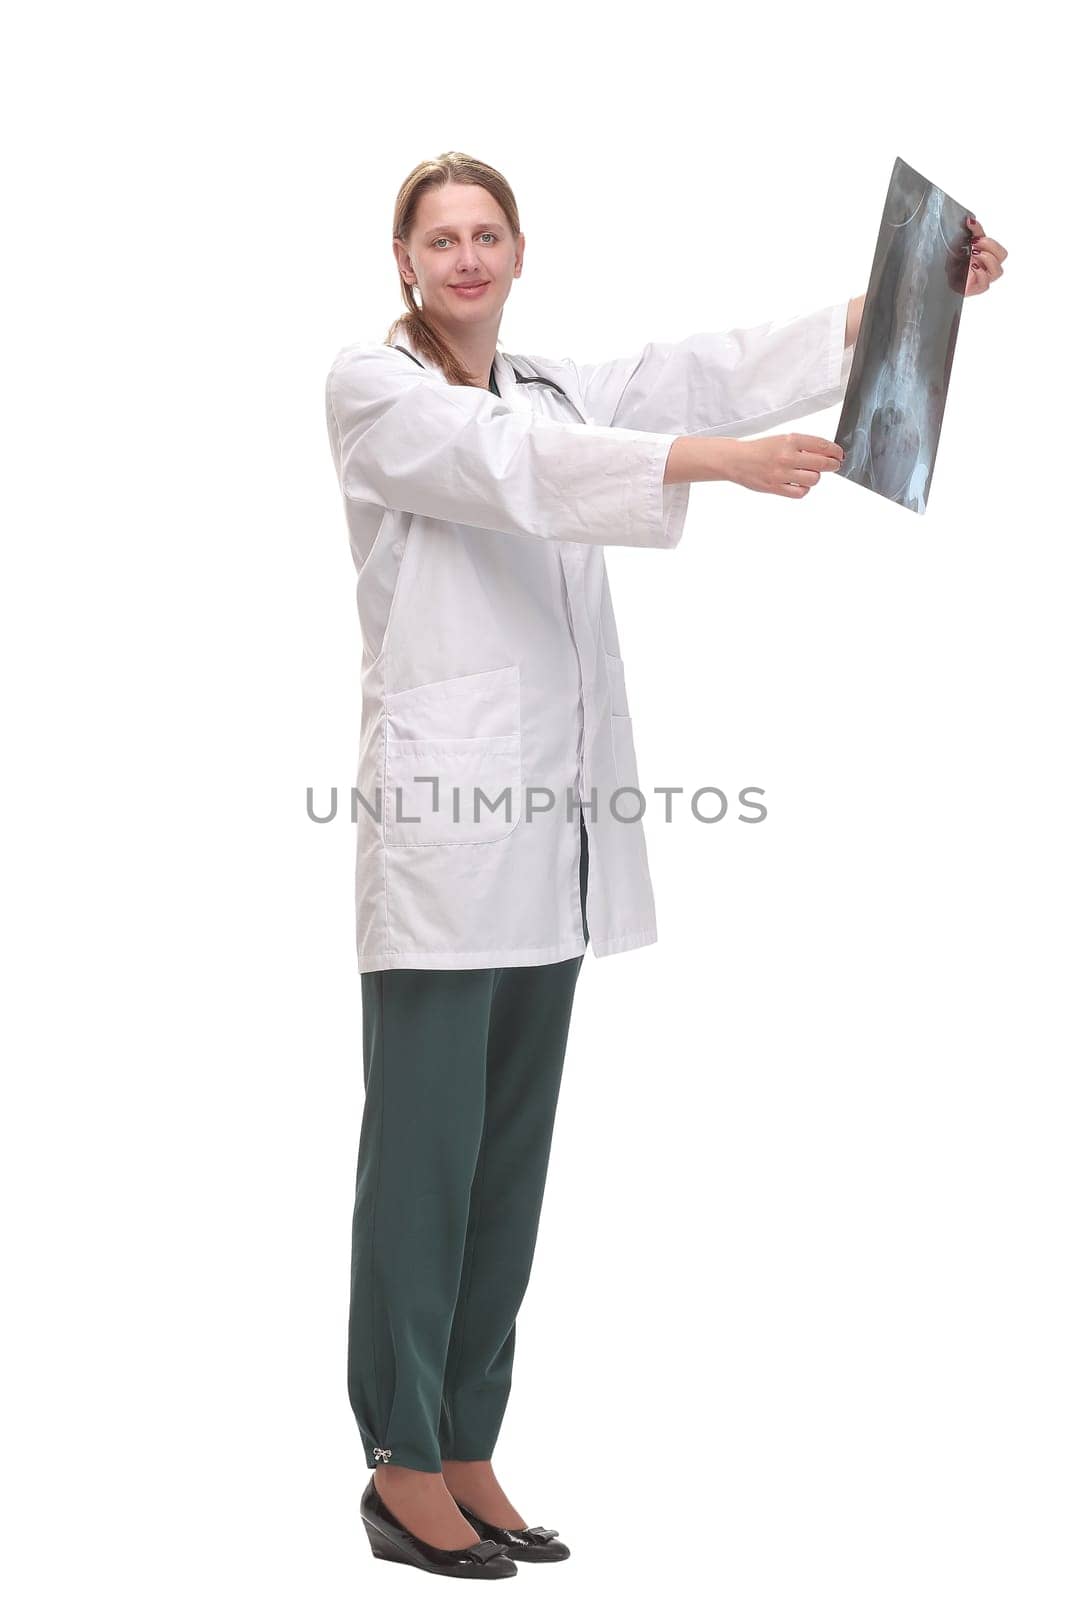 Front view of female doctor wearing stethoscope and glasses looking at an x-ray. Concept of medical help